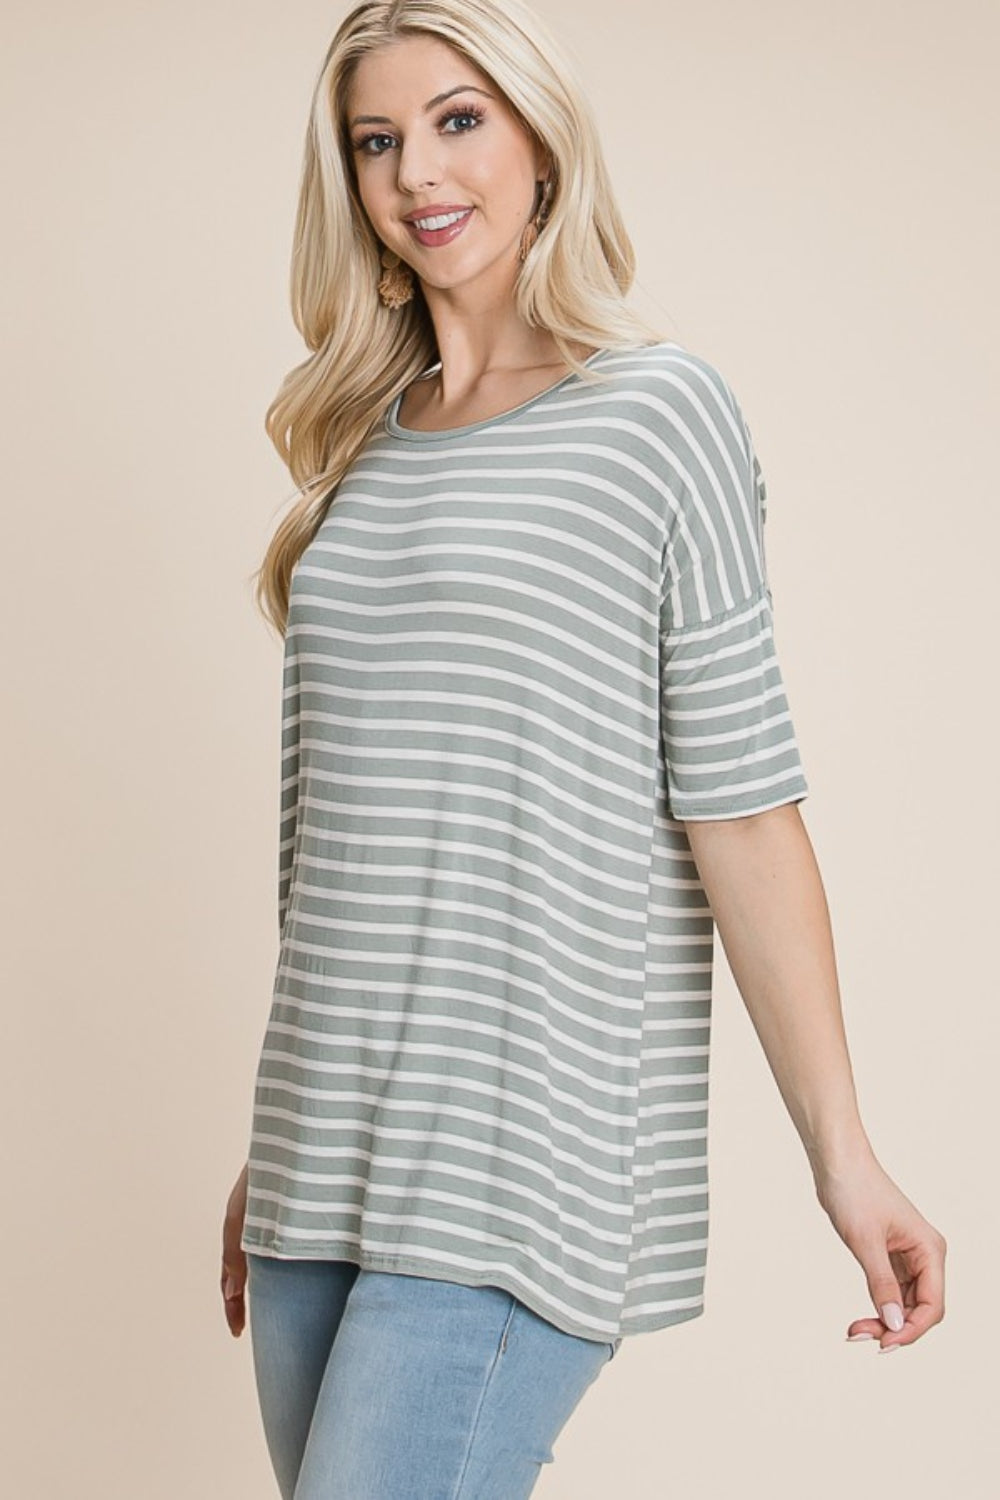 All About Stripes Top - Sage